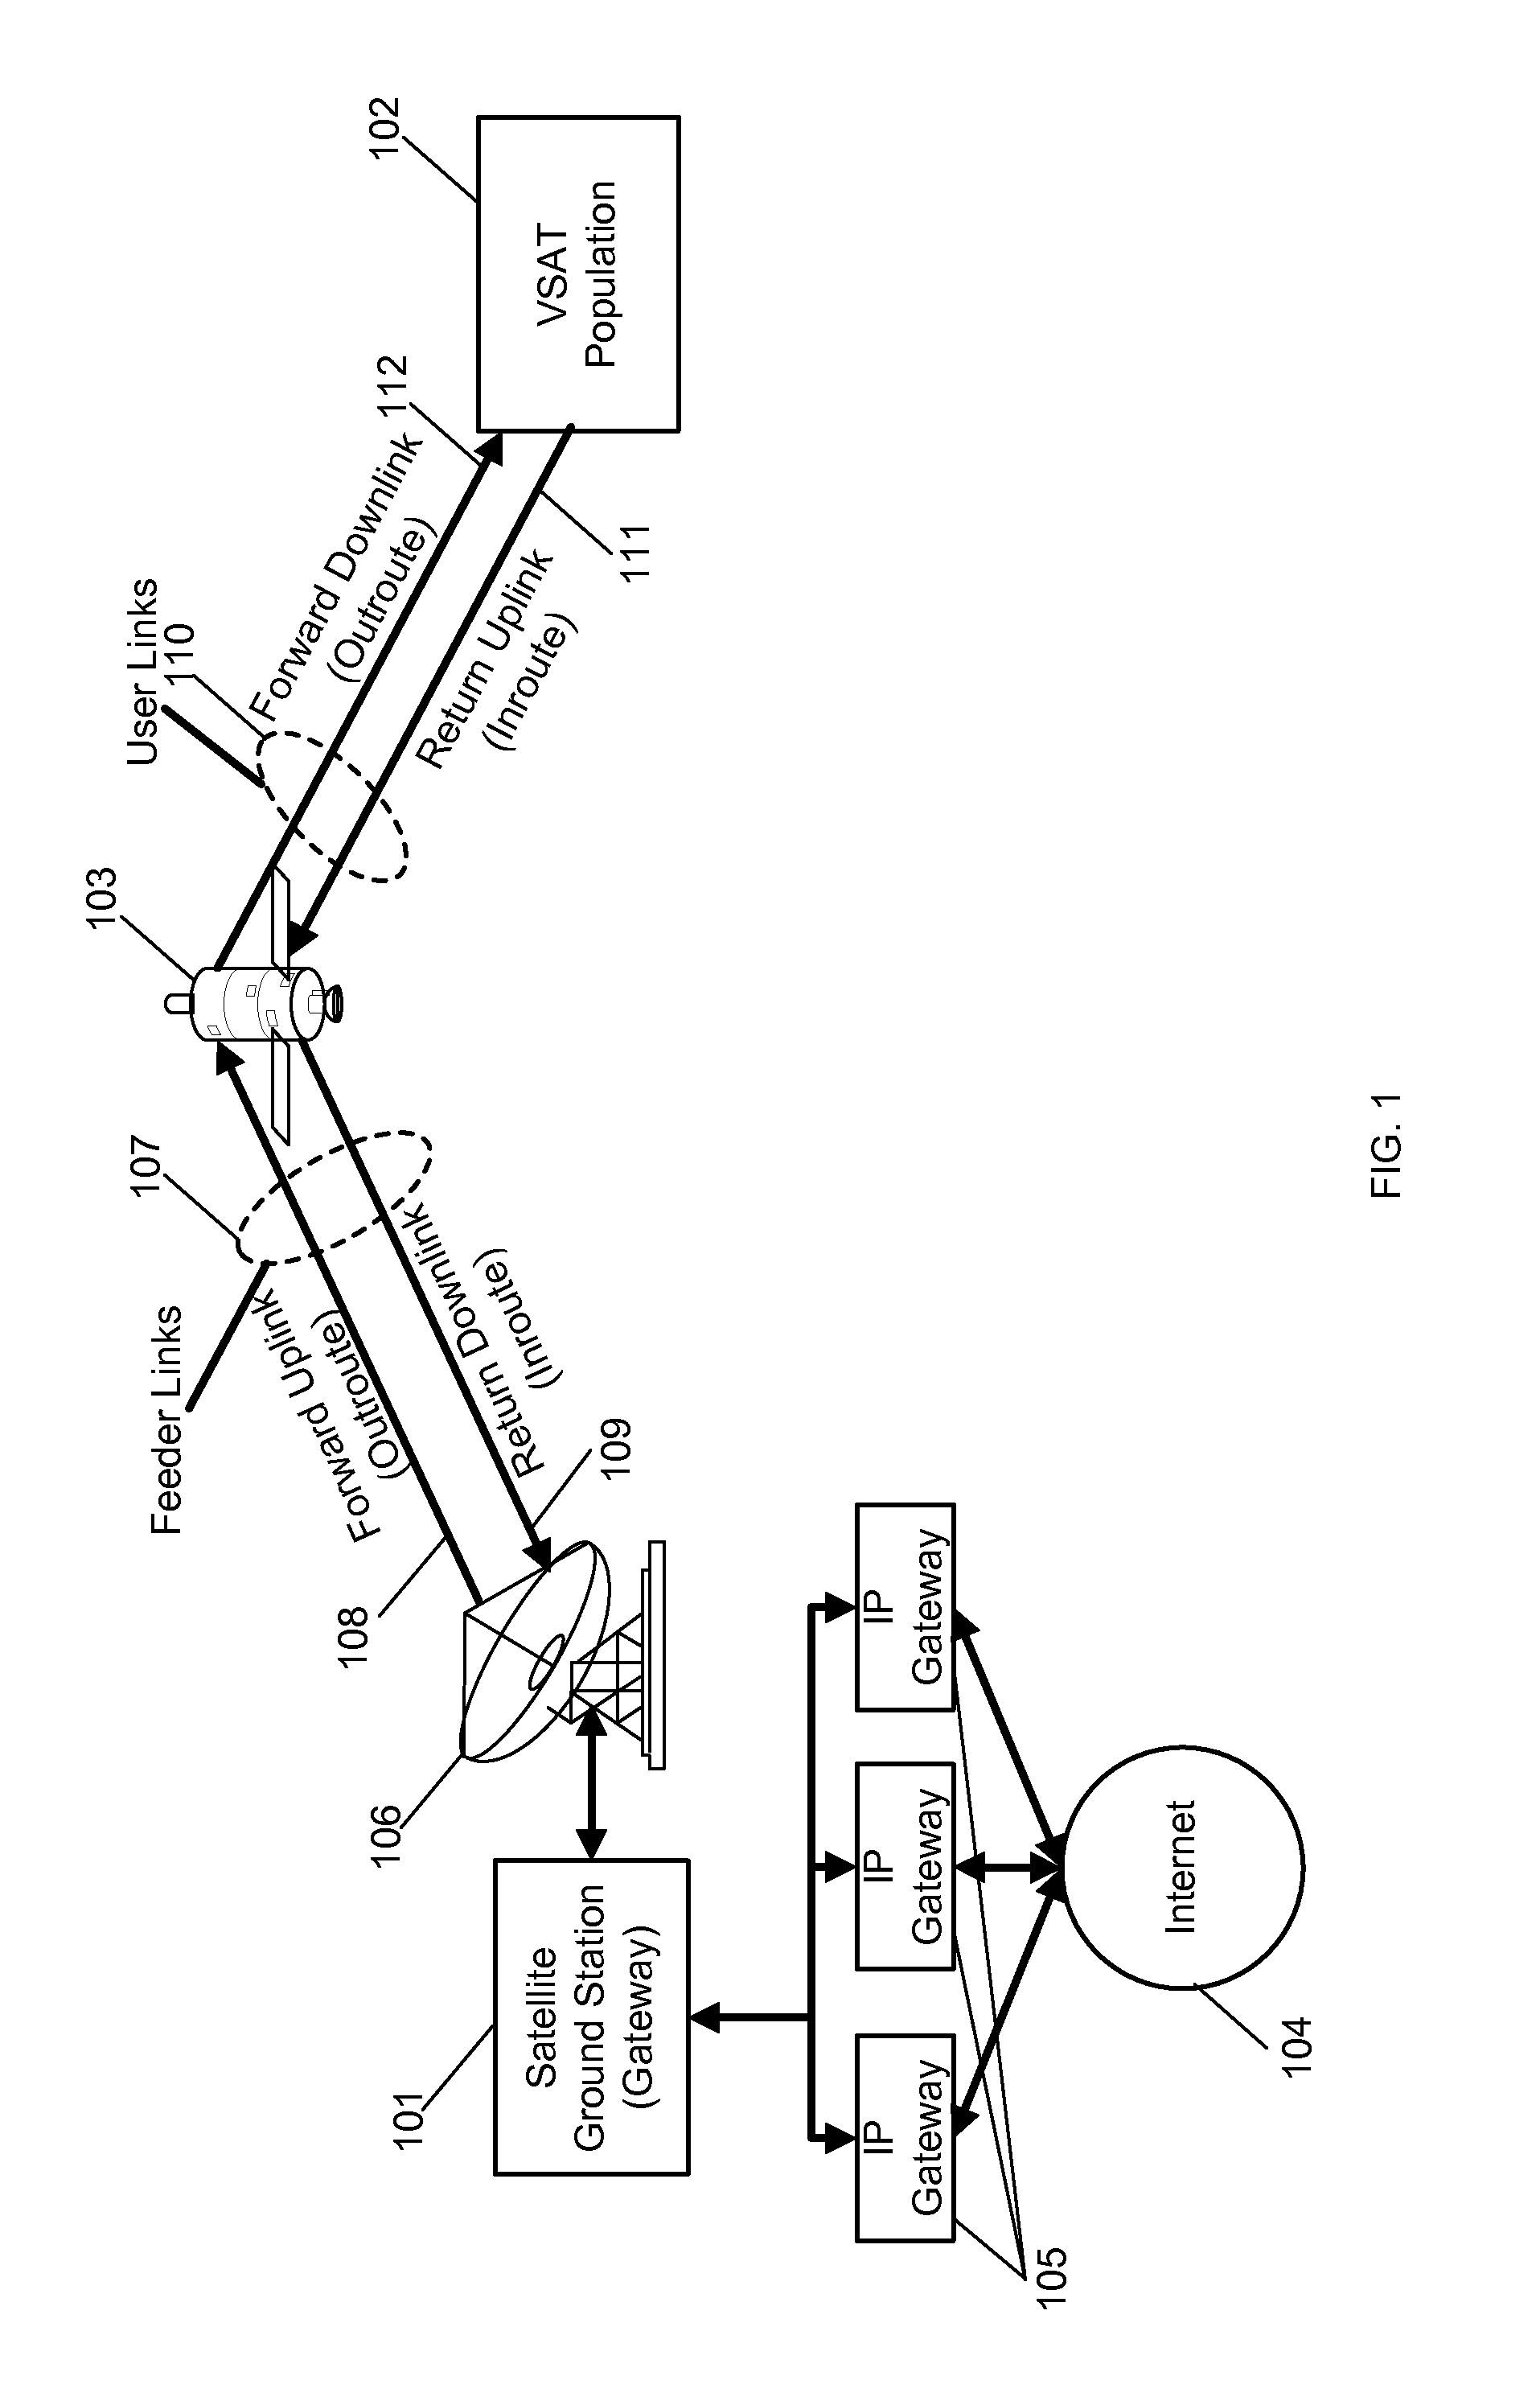 Method and system for controlling TCP traffic with random early detection and window size adjustments